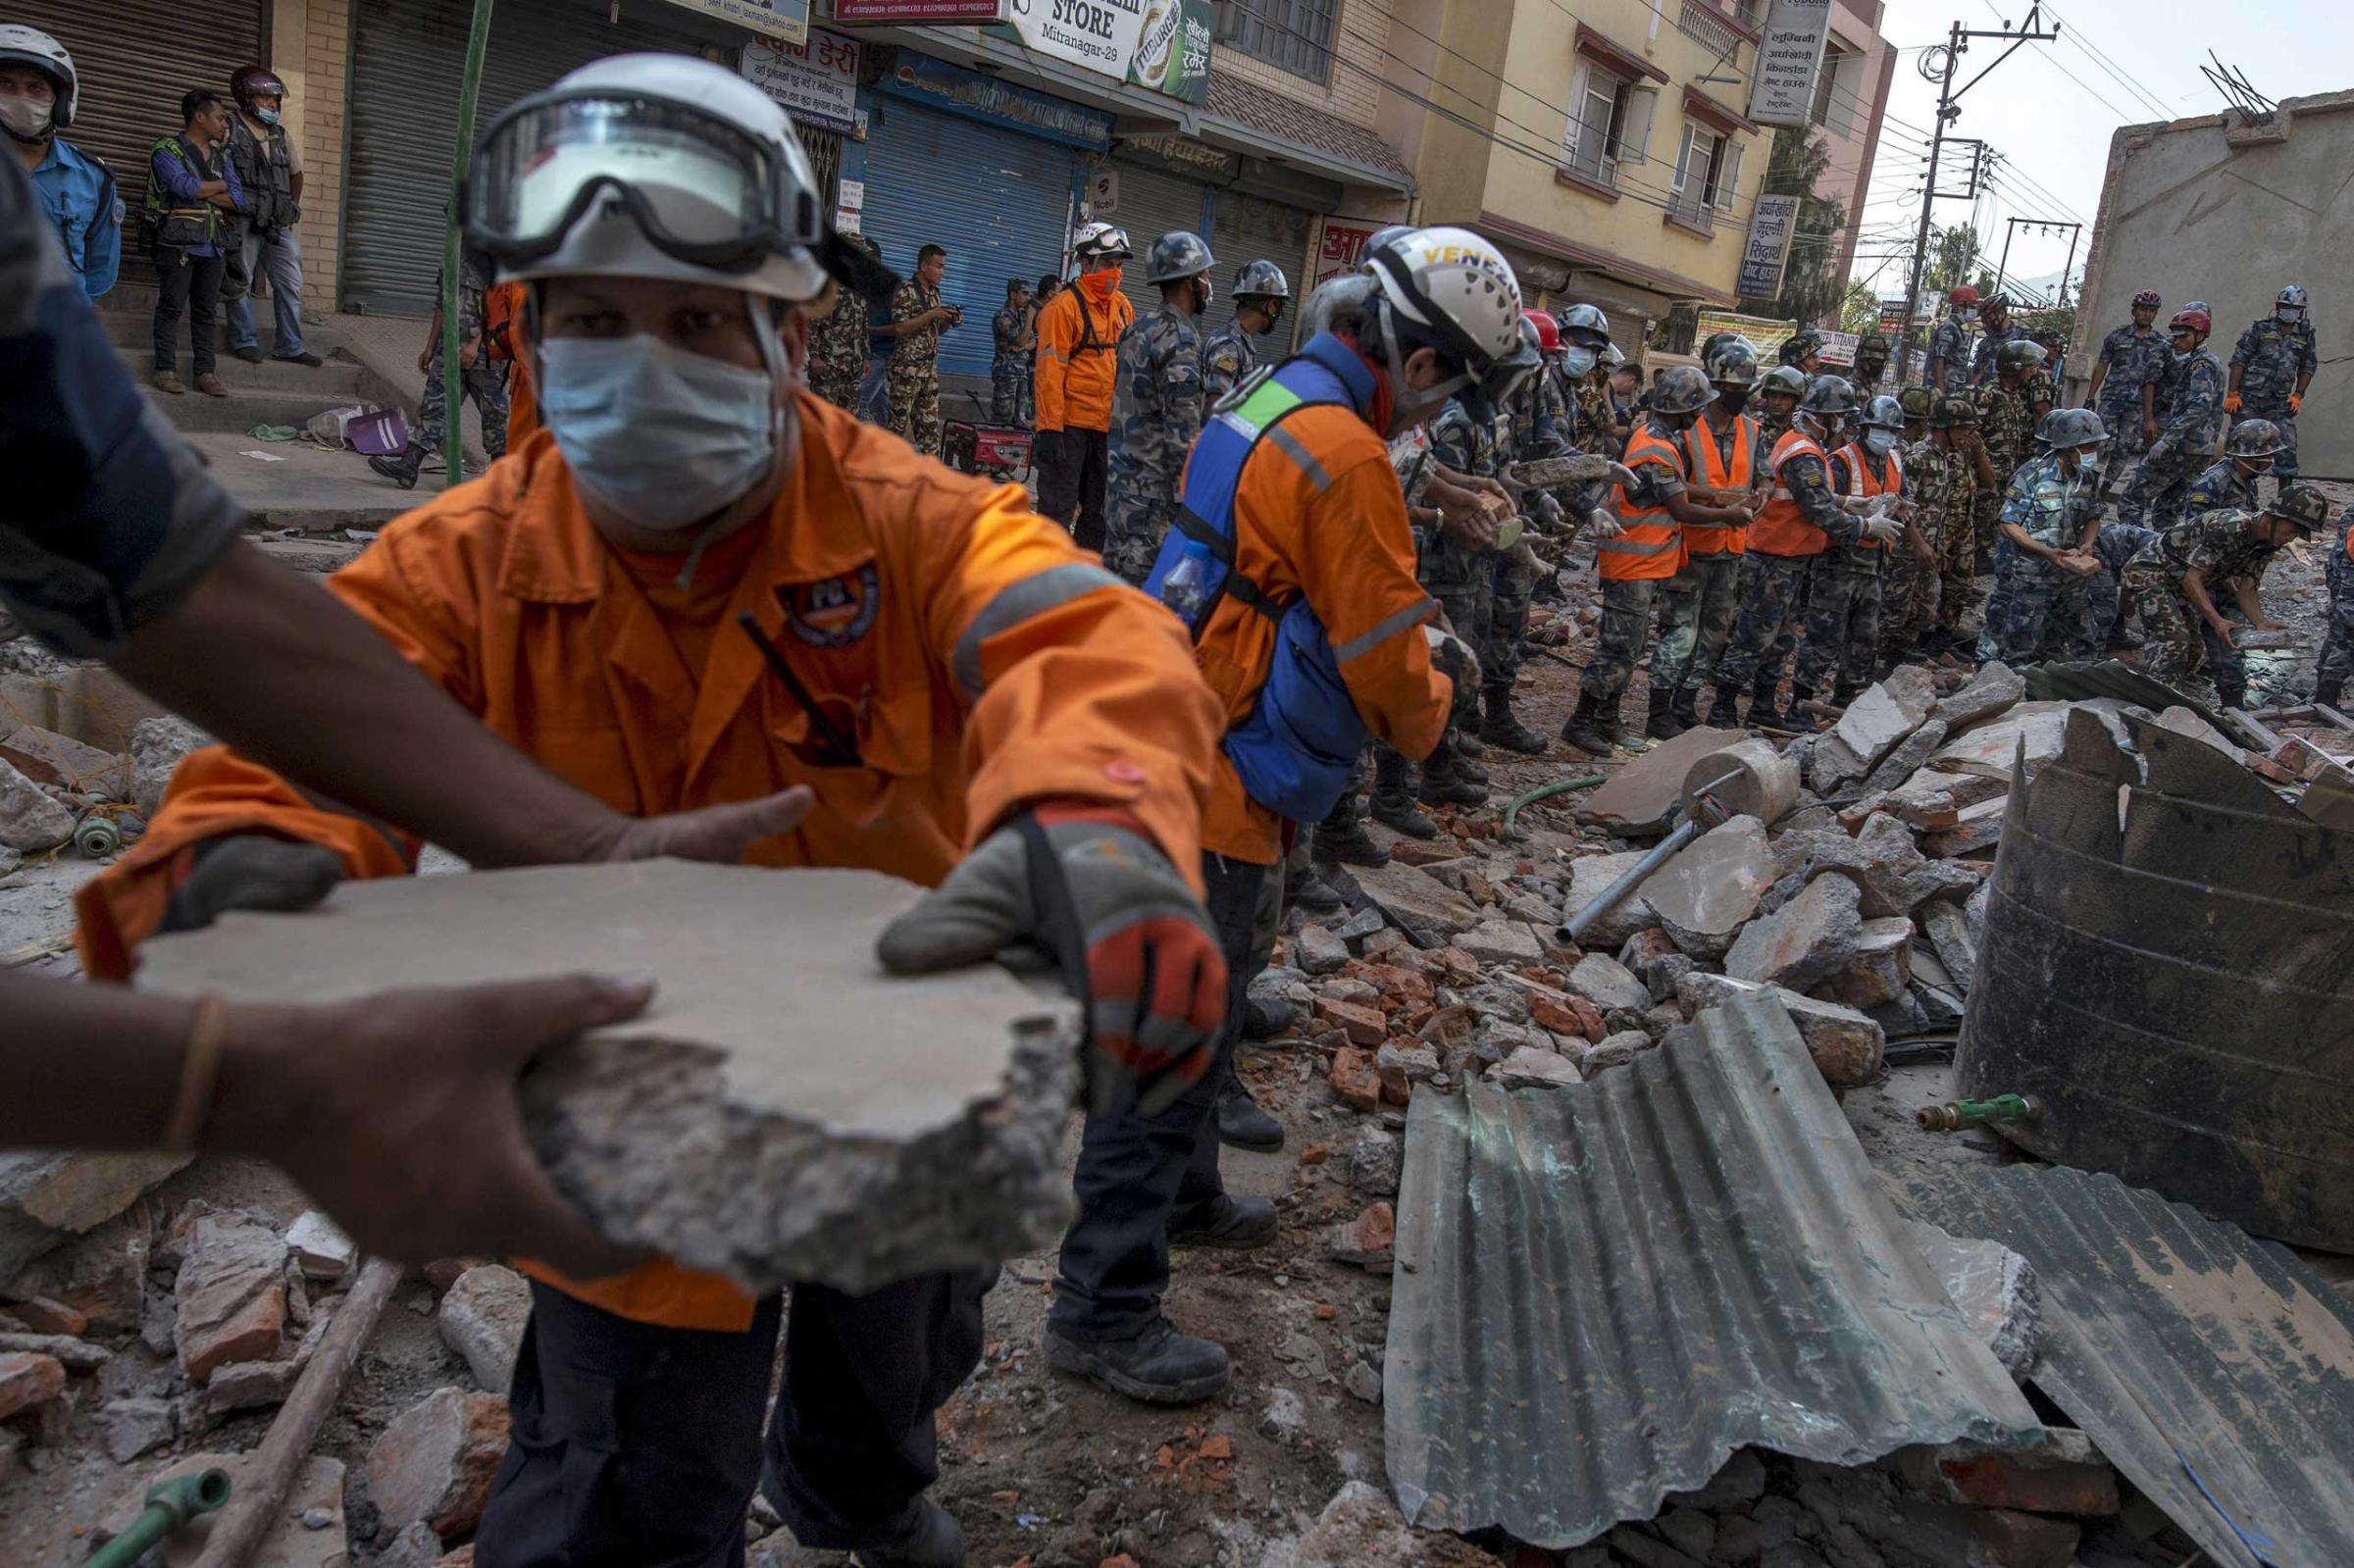 Nepalese military personnel remove debris in search of survivors after a fresh 7.3 earthquake struck, in Kathmandu on May 12, 2015.